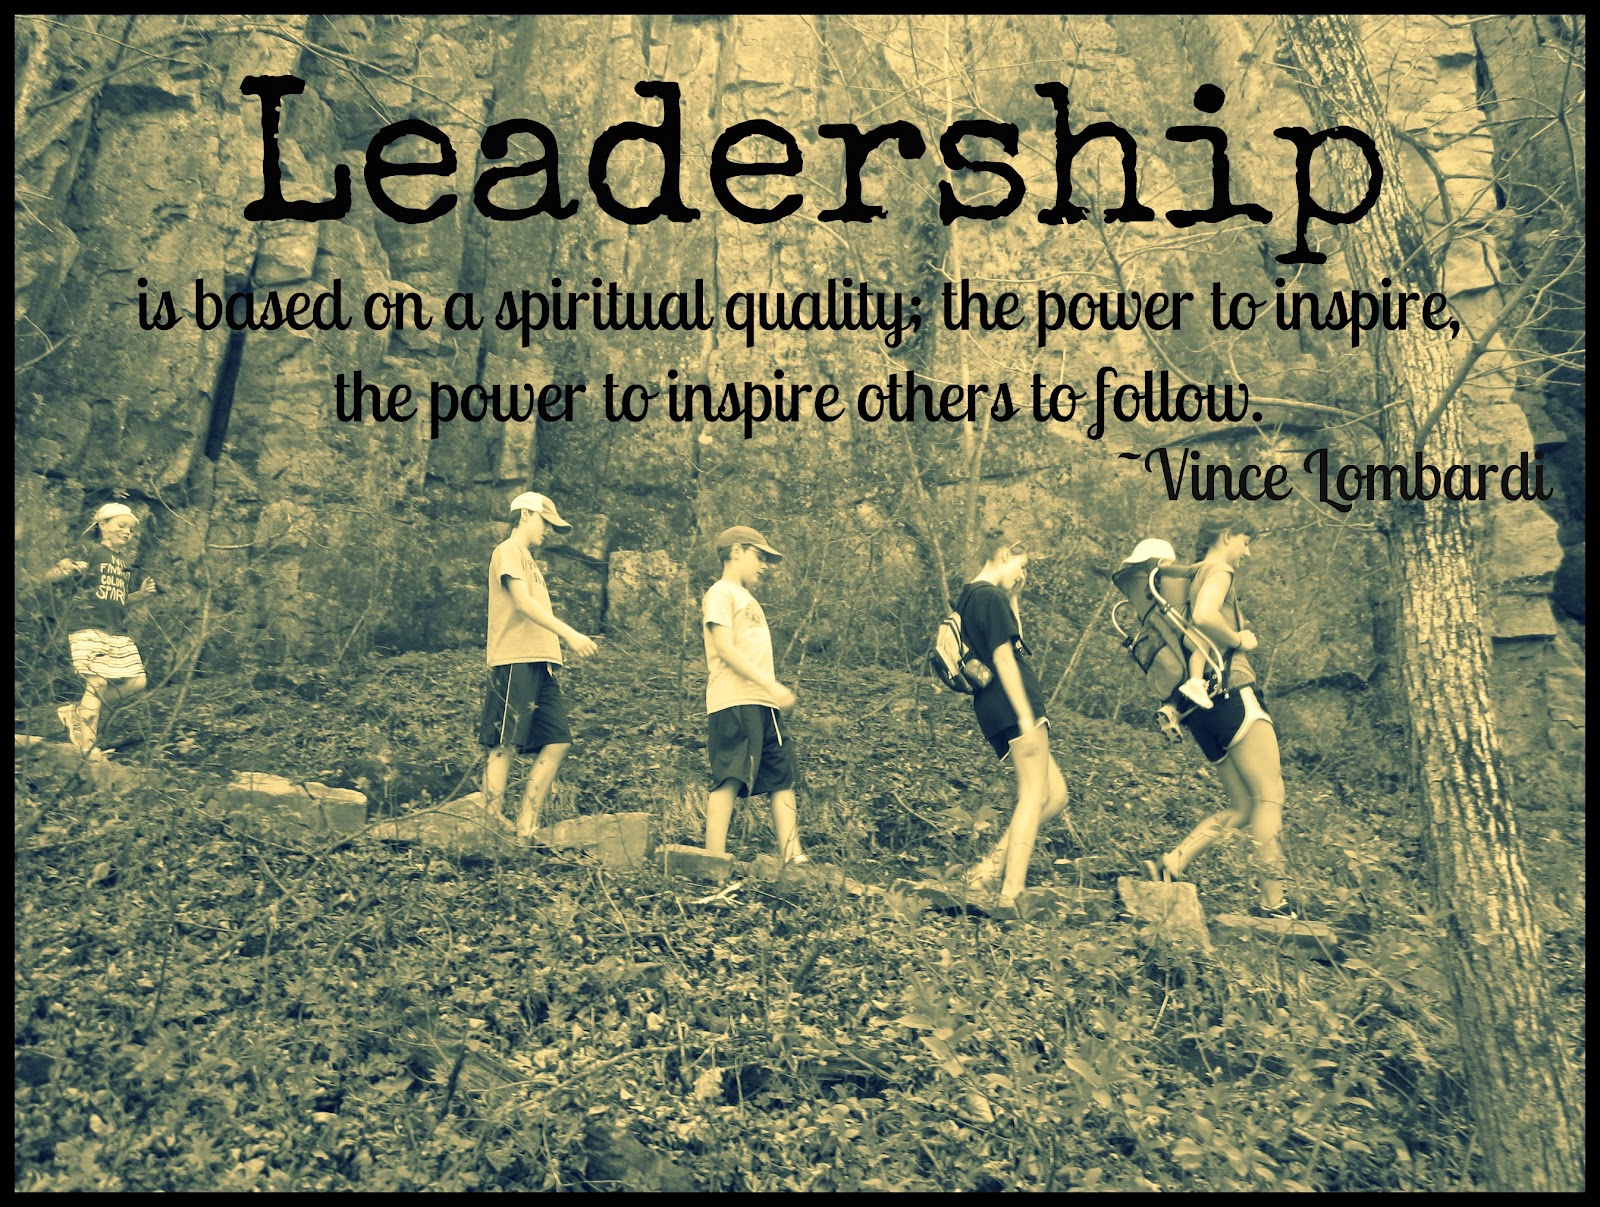 Leadership is based on a spiritual quality the power to inspire the power to inspire others to follow – Vince Lombardi